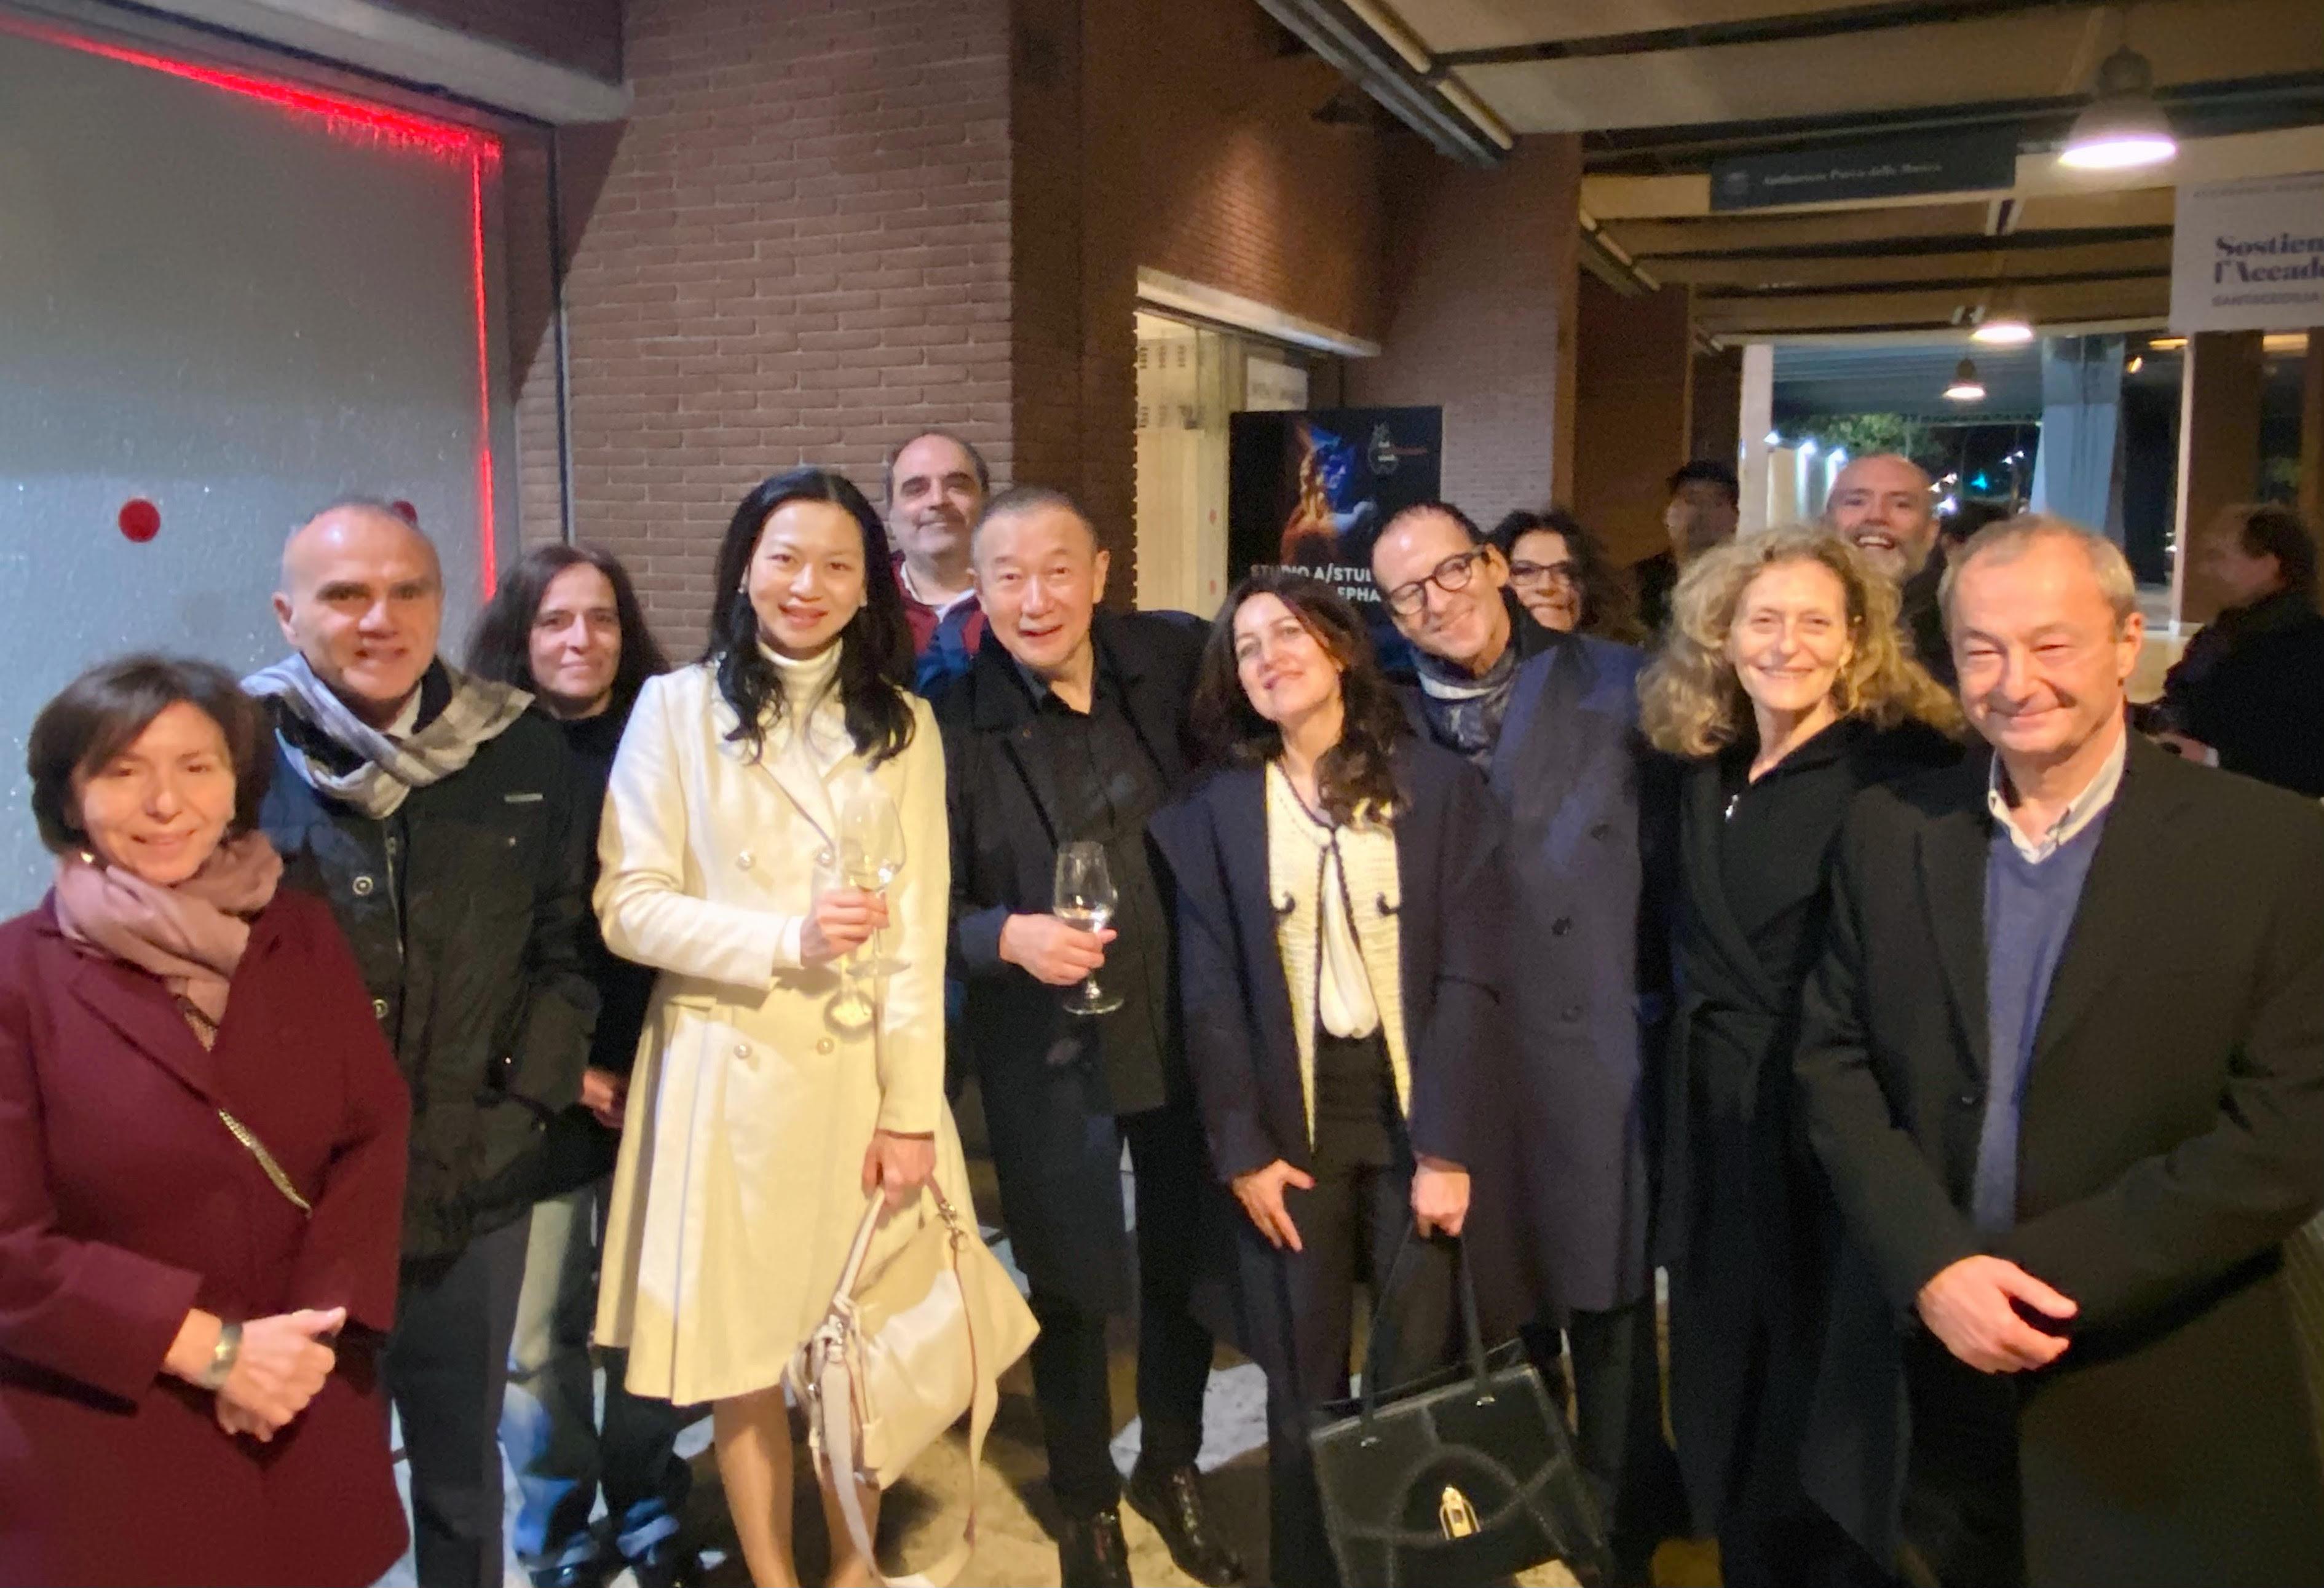 The Hong Kong Economic and Trade Office, Brussels hosted a networking session after internationally renowned composer and conductor Tan Dun performed "Buddha Passion" in Rome, Italy on November 23. Deputy Representative of the HKETO, Brussels, Miss Fiona Li (front row, third left) brought the guests invited from the art, academic and business circles in Italy to meet with Tan Dun (front row, fourth left).